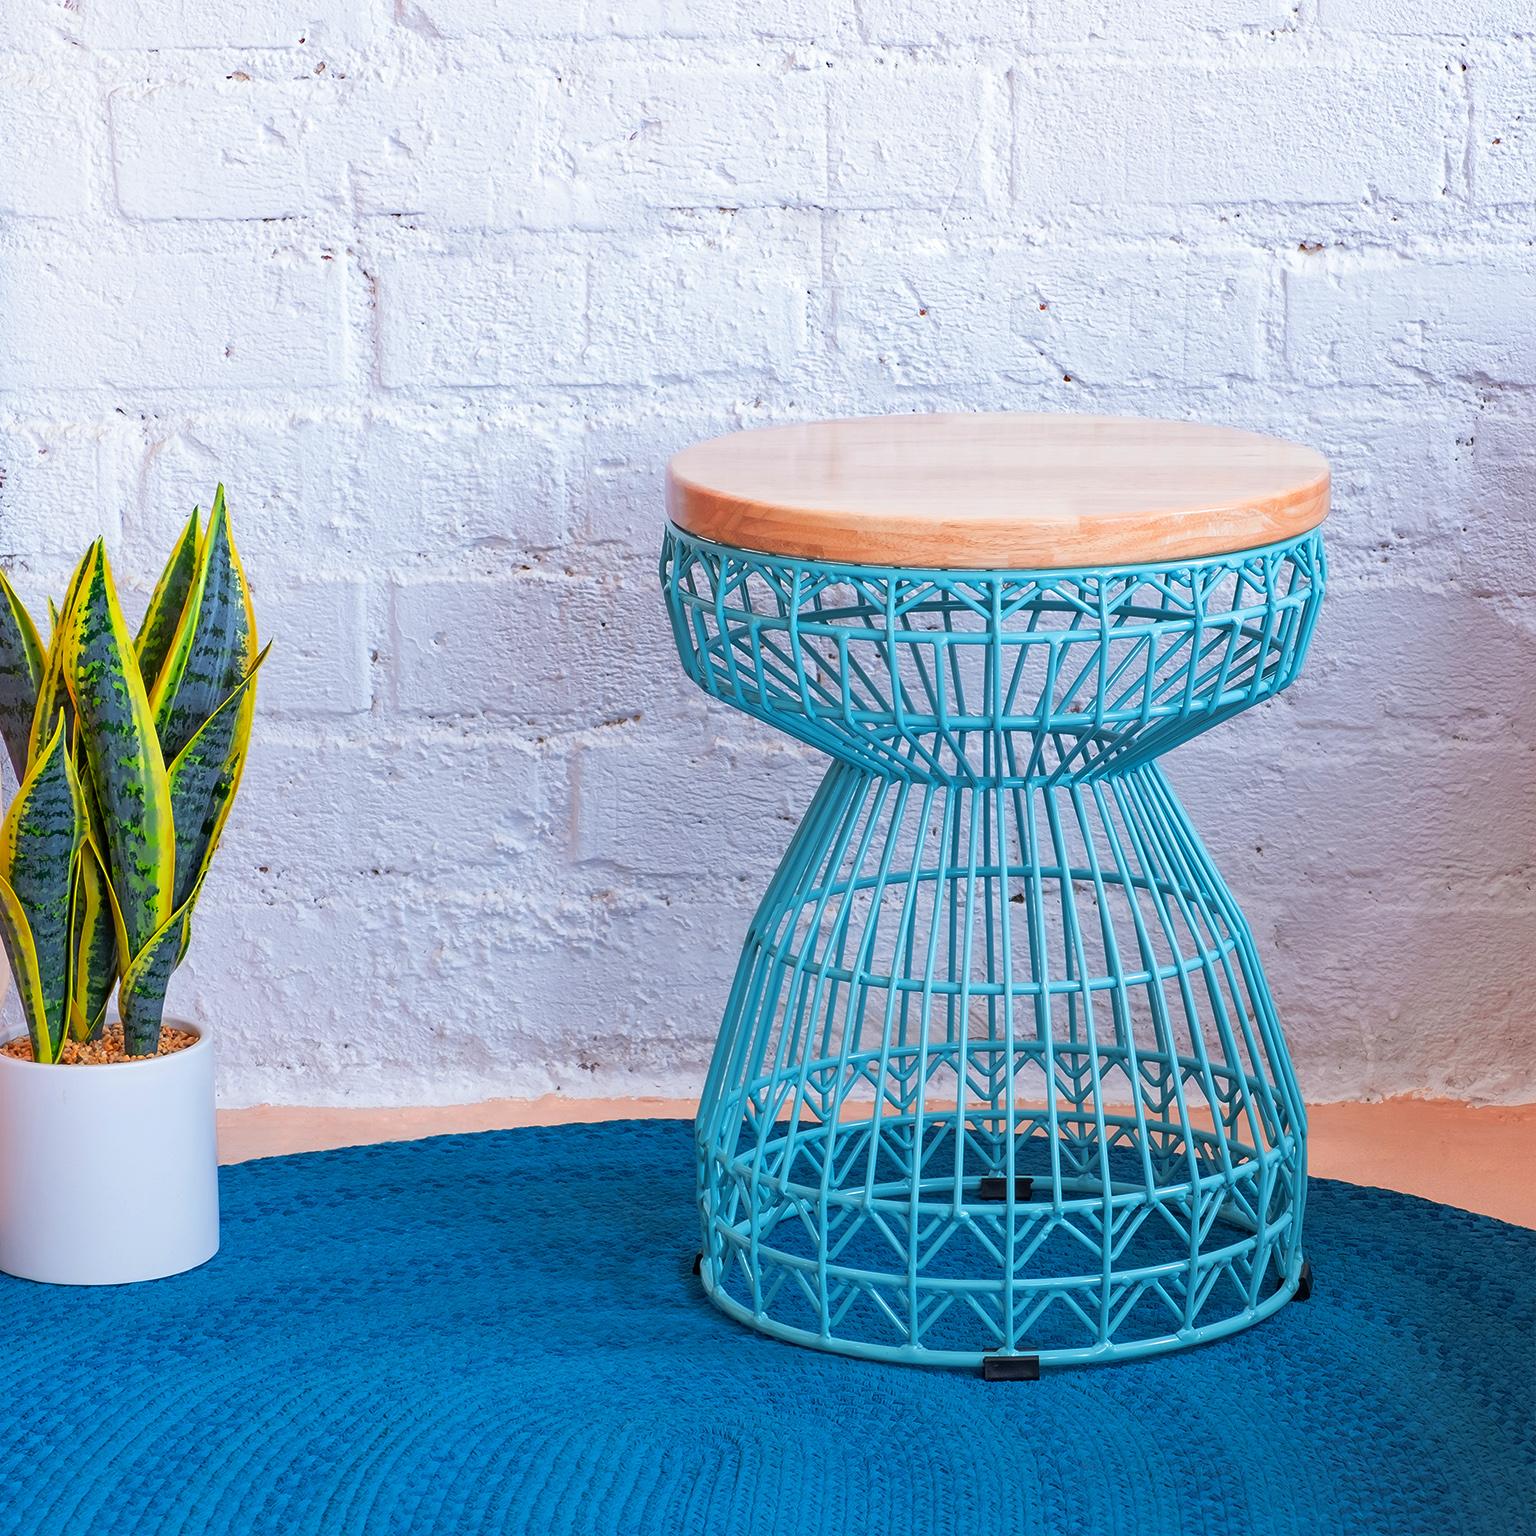 Contemporary Modern Wire Stool with a Wood Seat, Sweet Stool in Black by Bend Goods